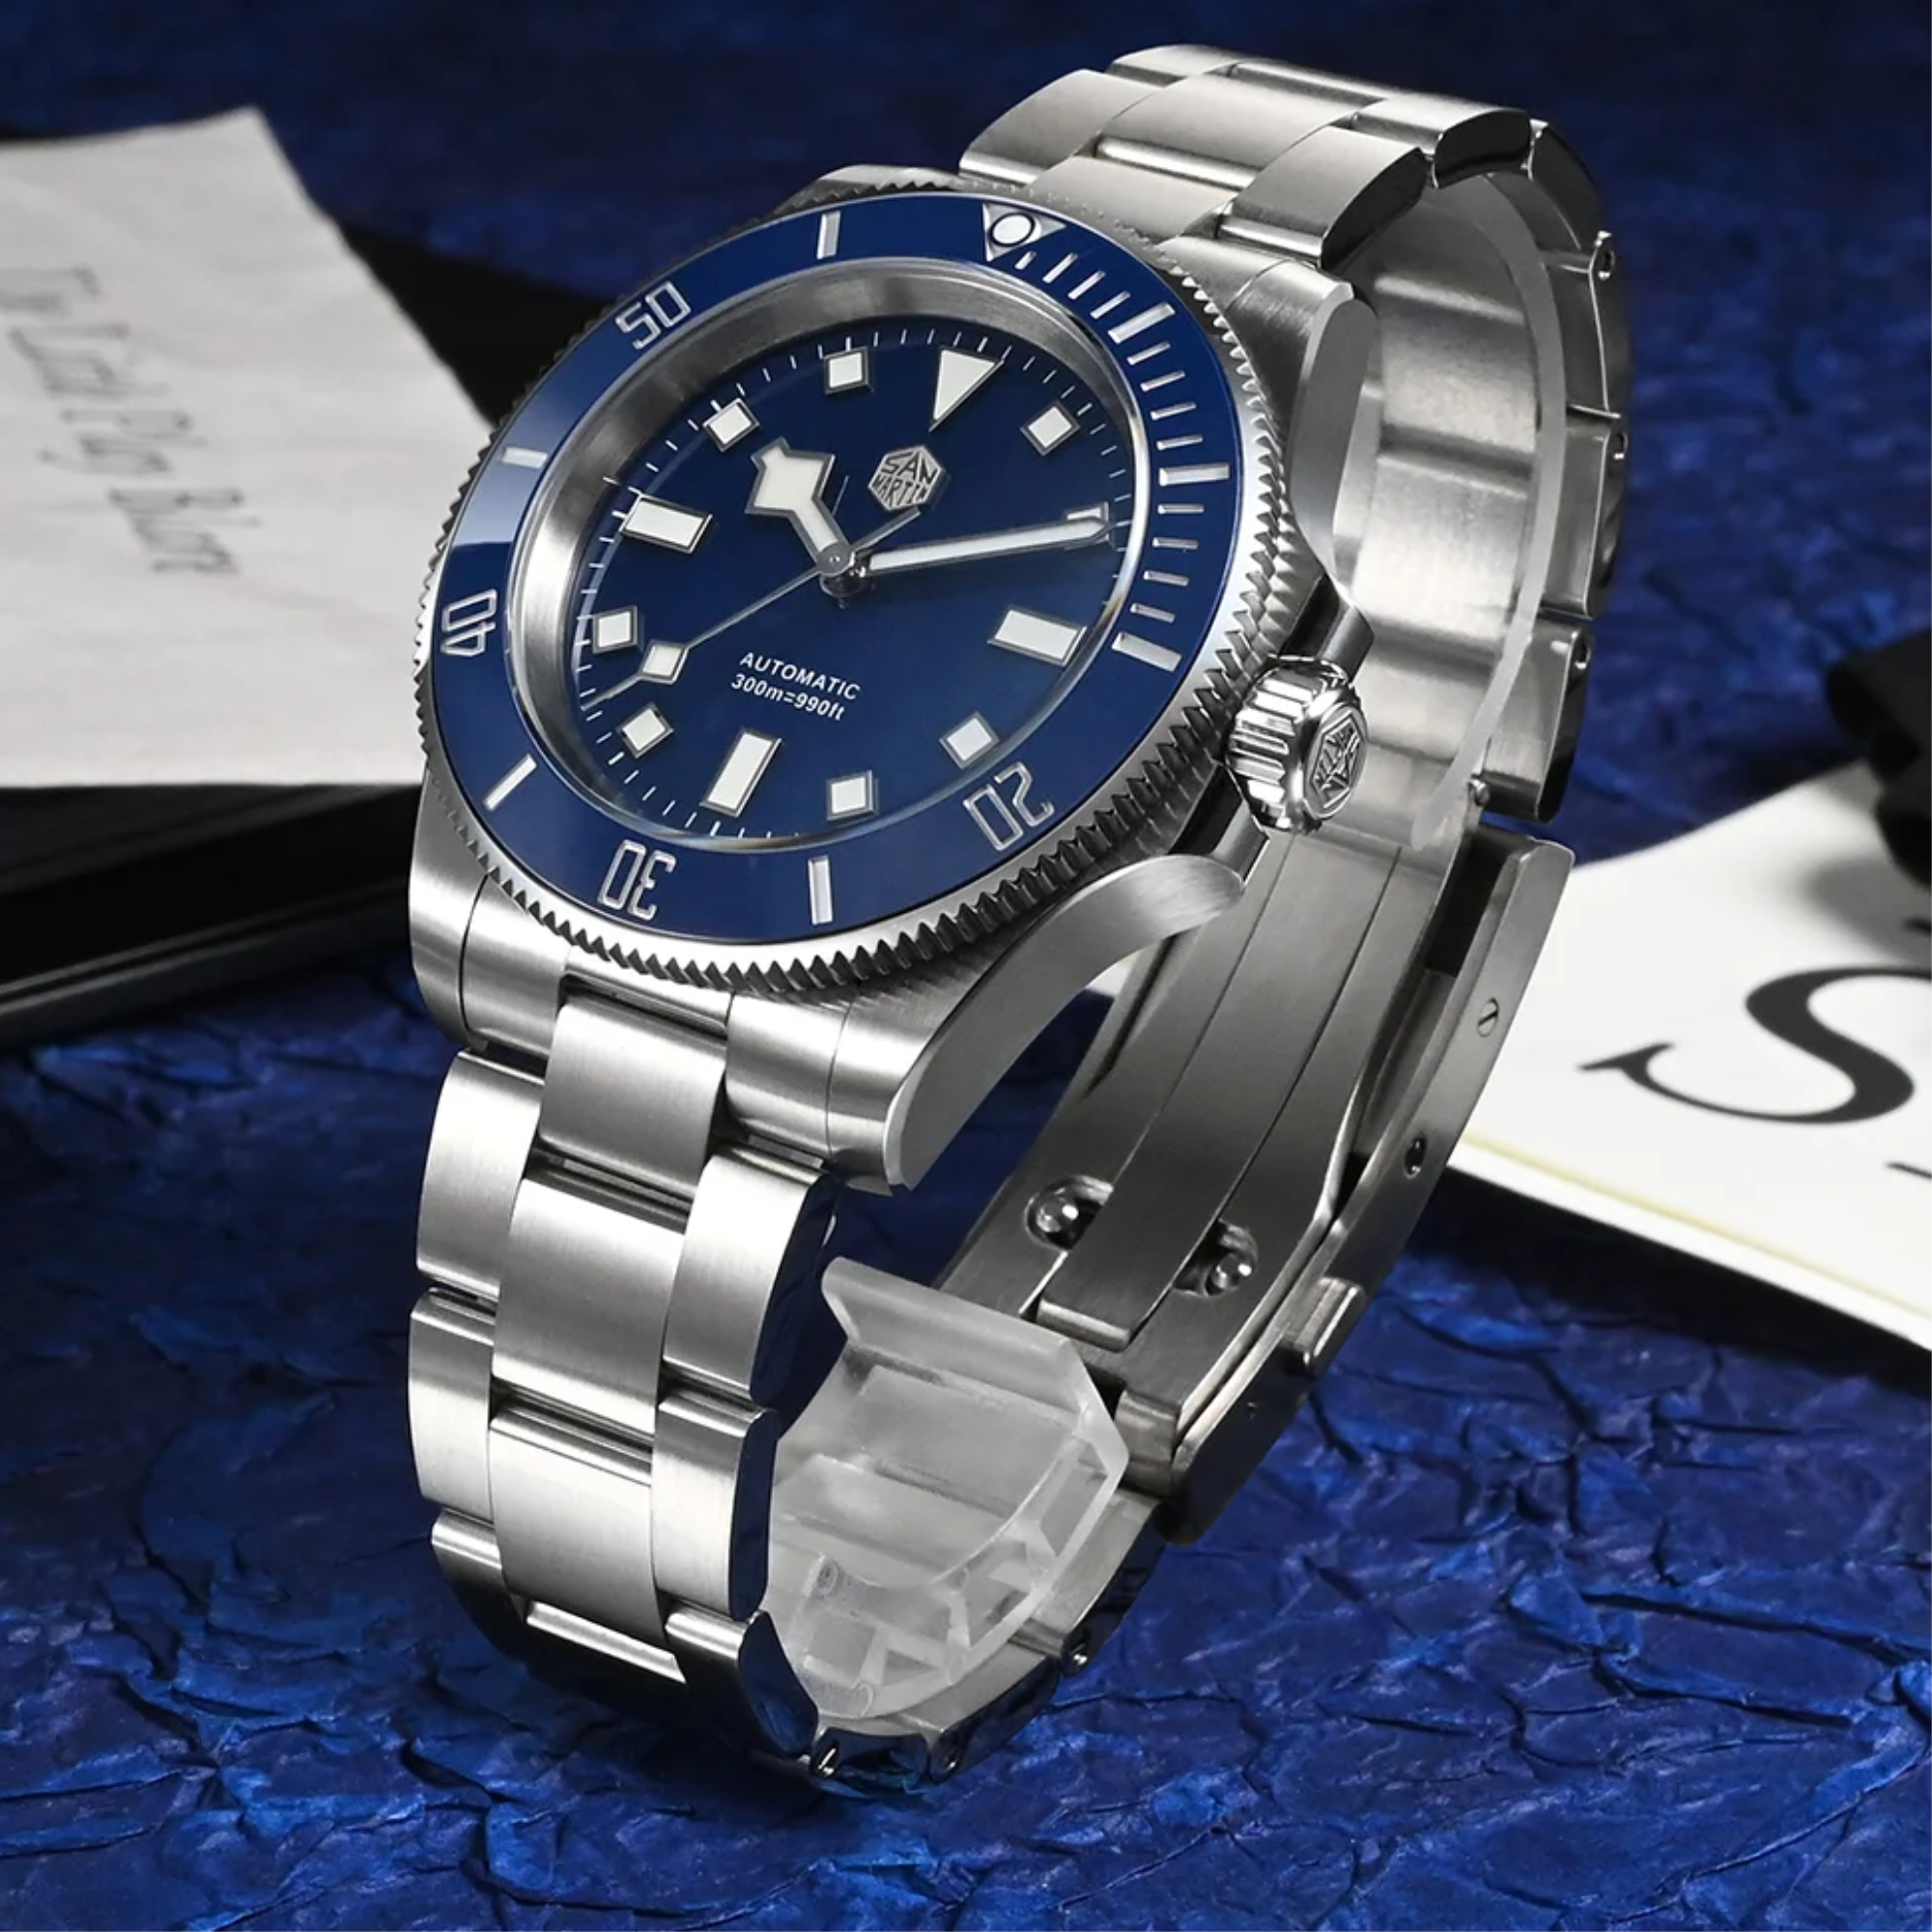 San Martin New Diver Watch Classic Snowflake Hands SN0111G - Blue san martin watches india online